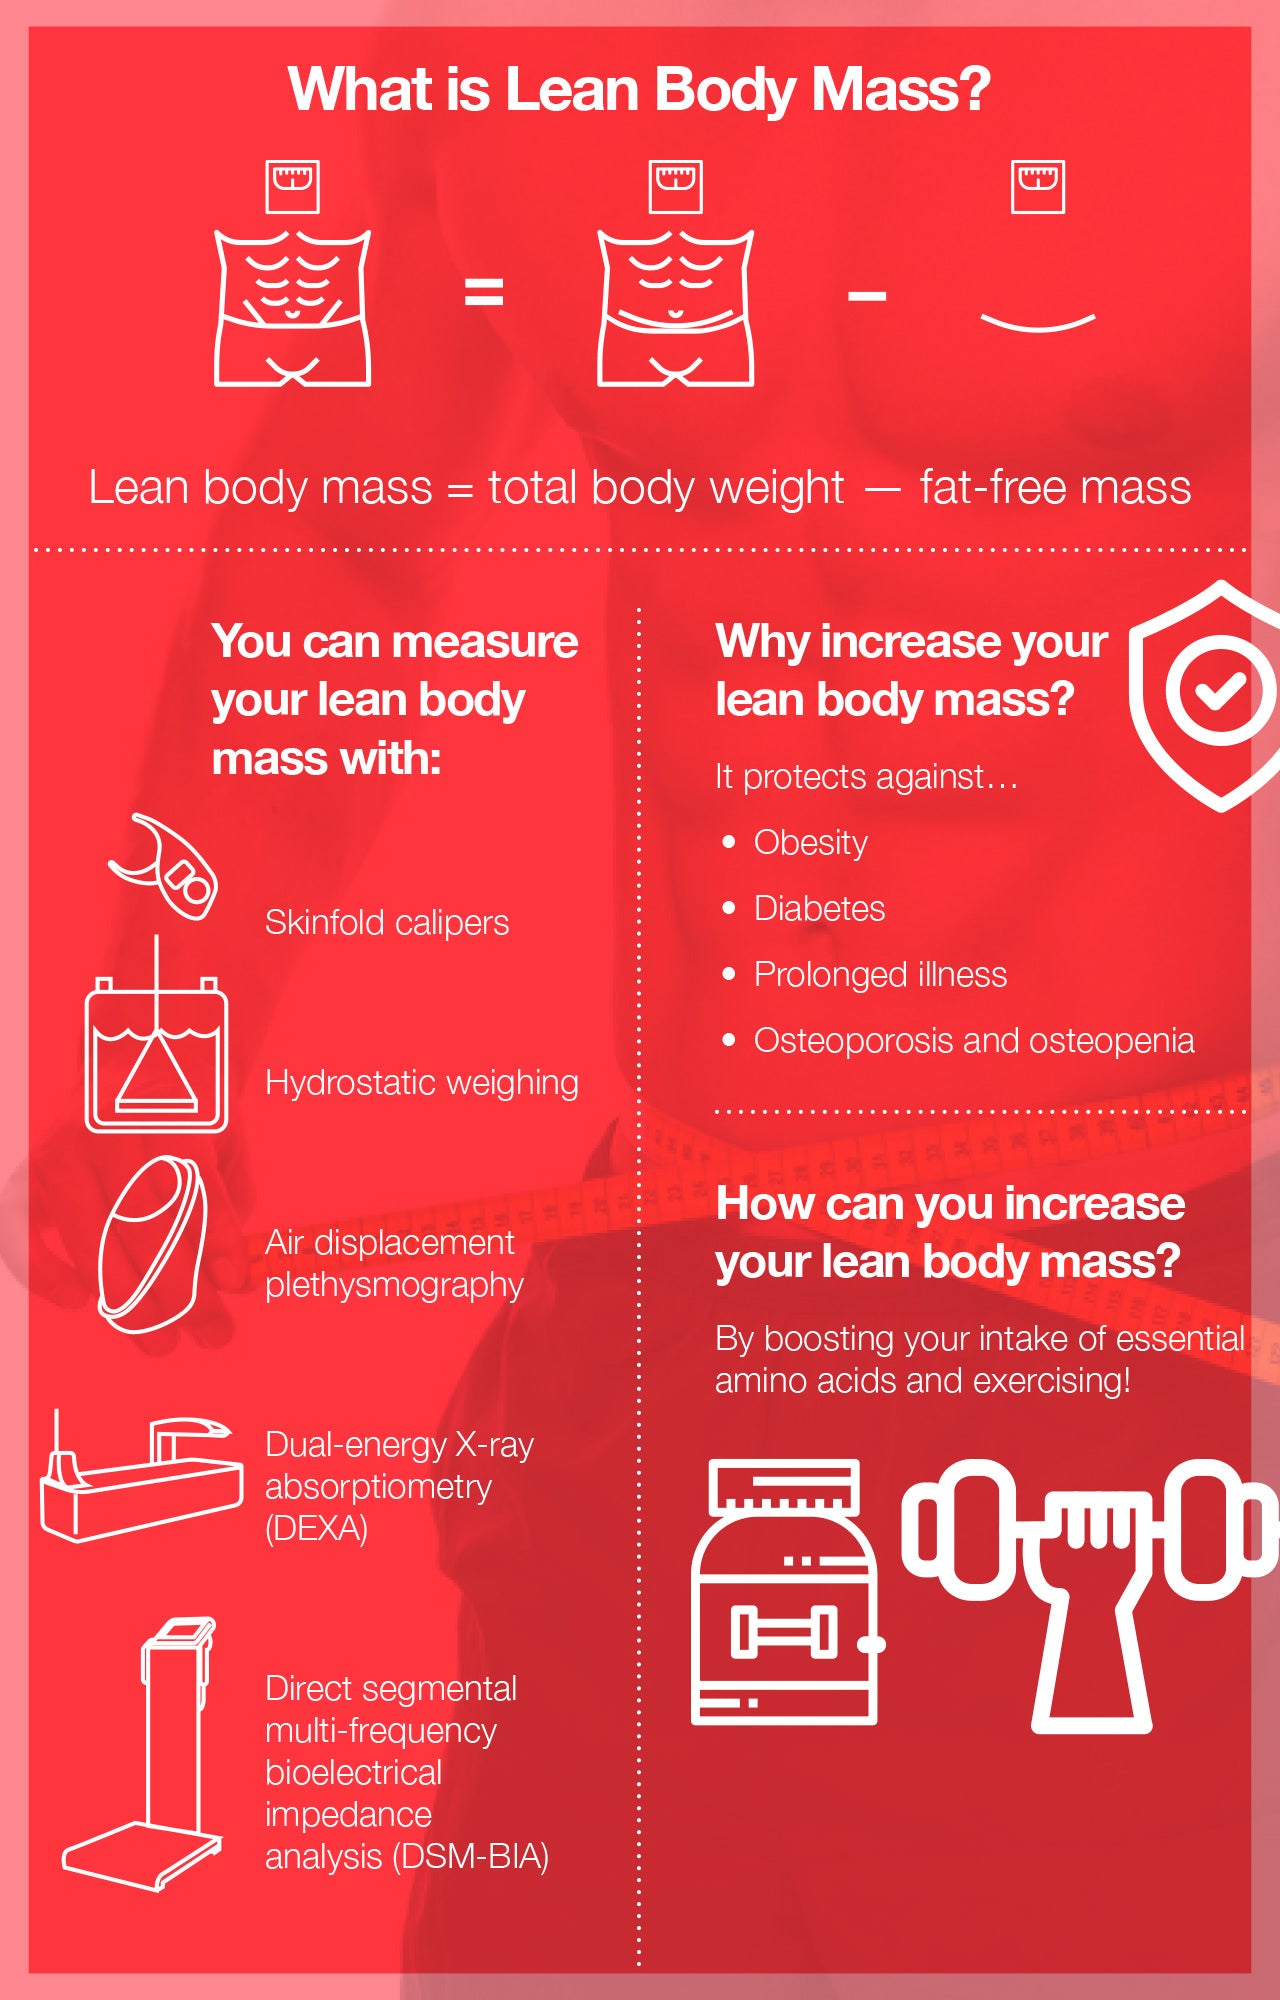 What Is Lean Body Mass?